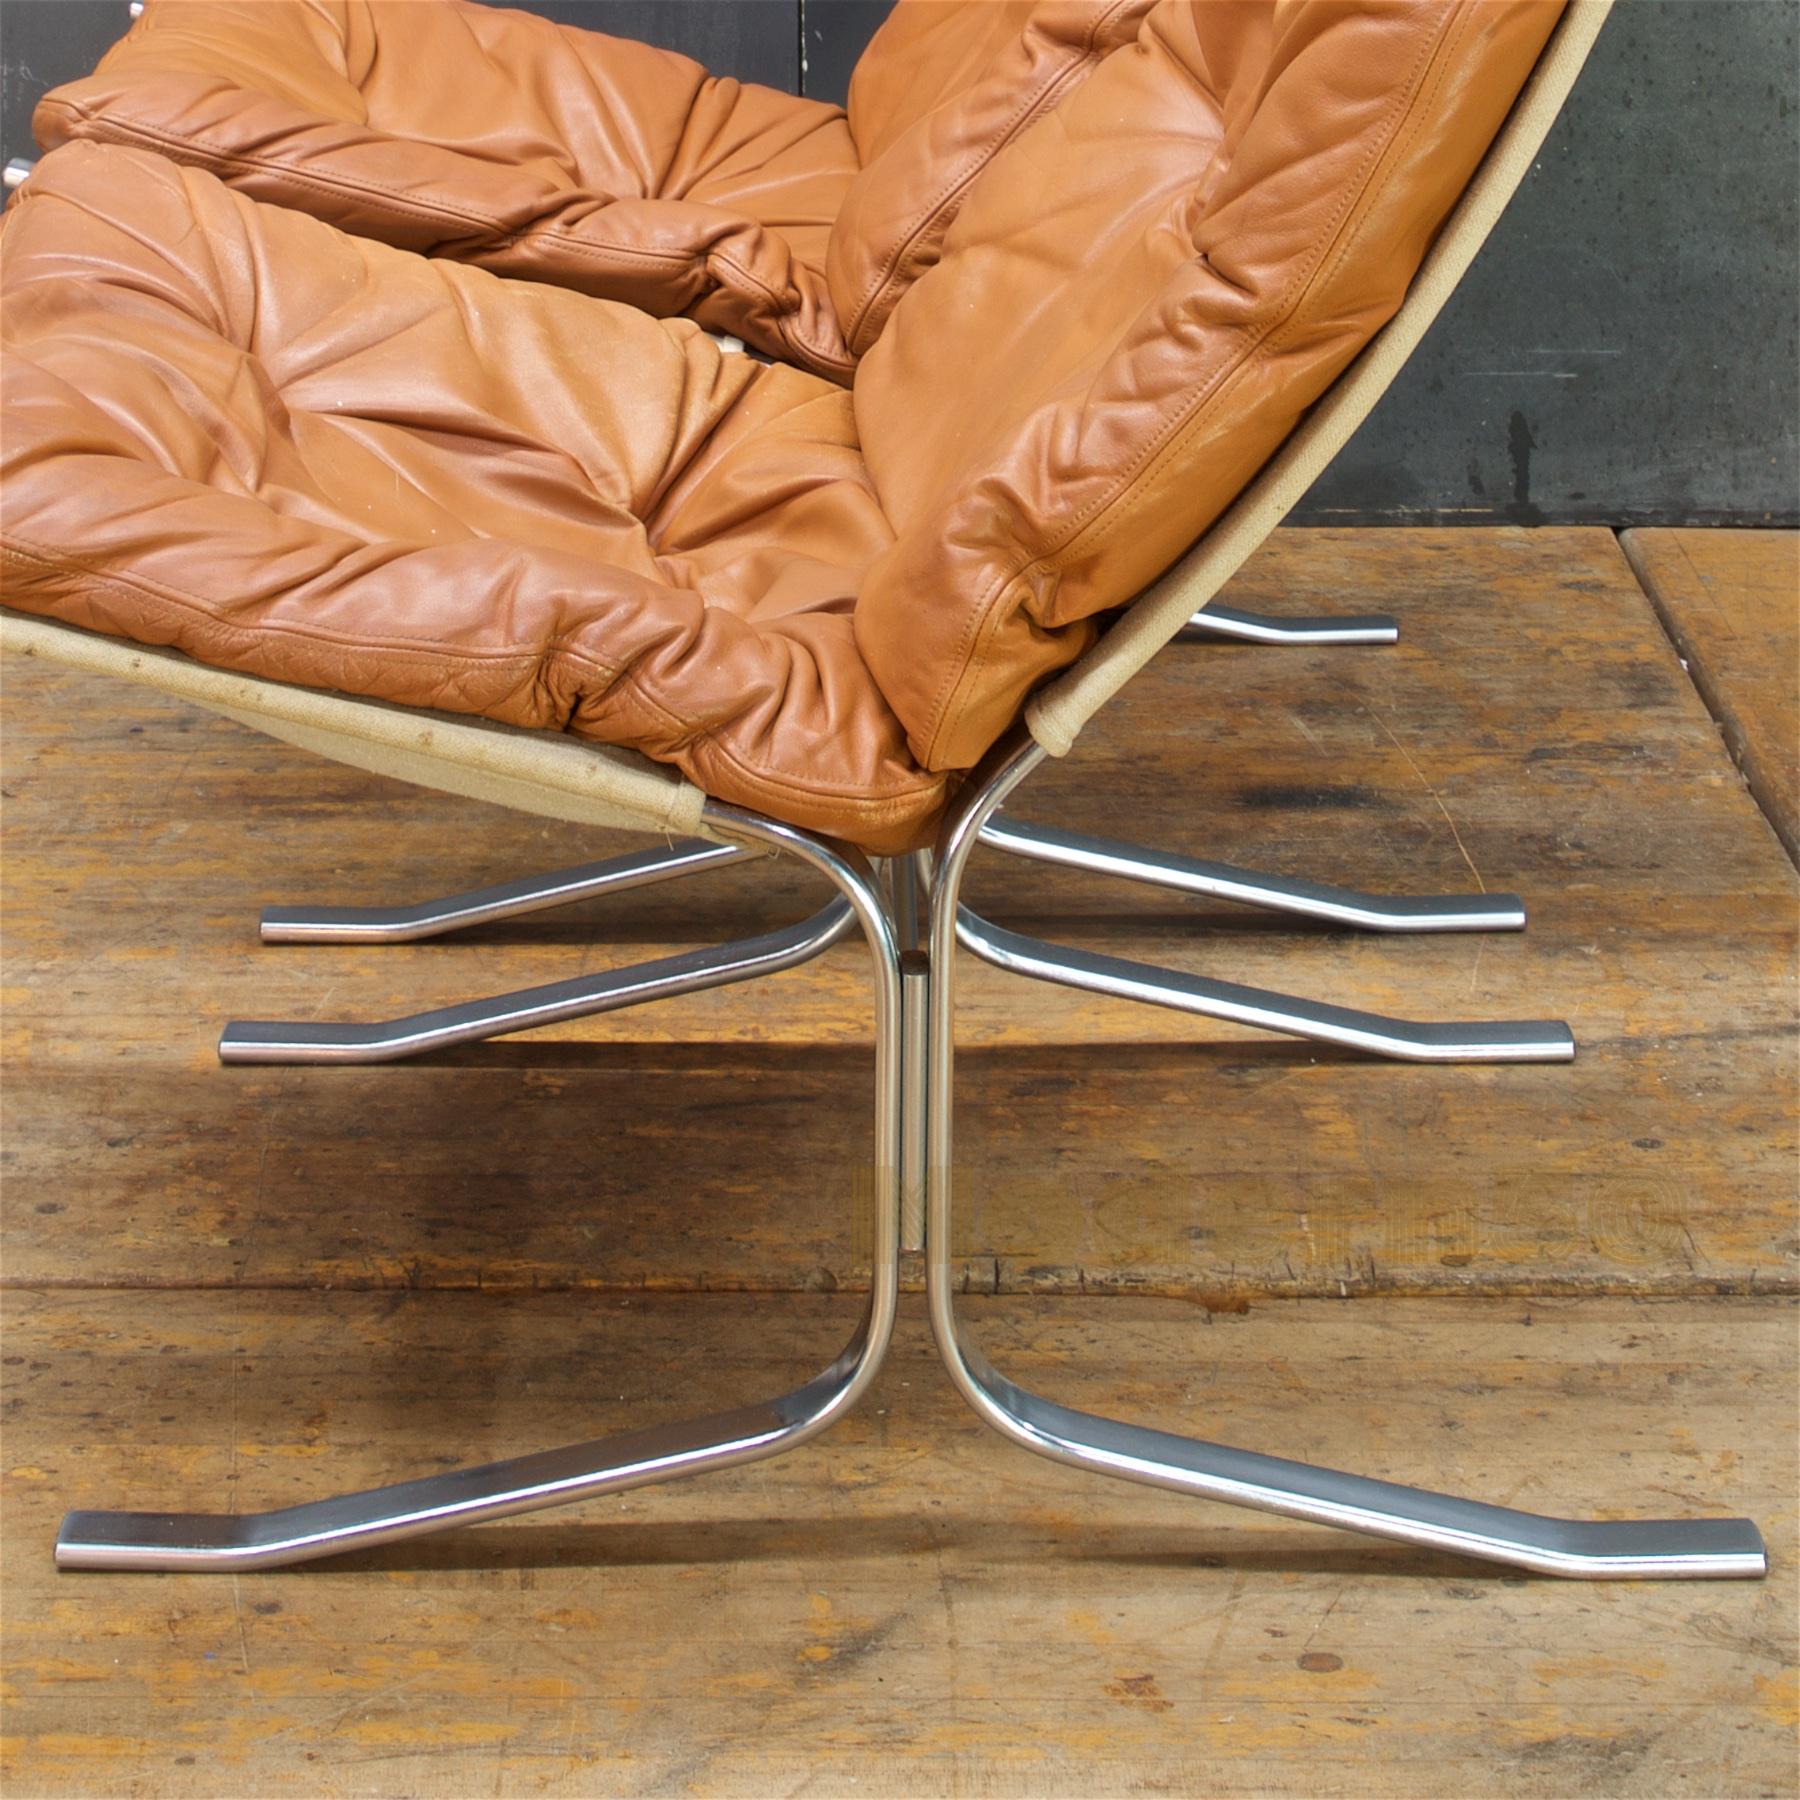 Polished 1960s Scandinavian Steel Leather Sling Lounge Chairs Mid-Century Cabinmodern